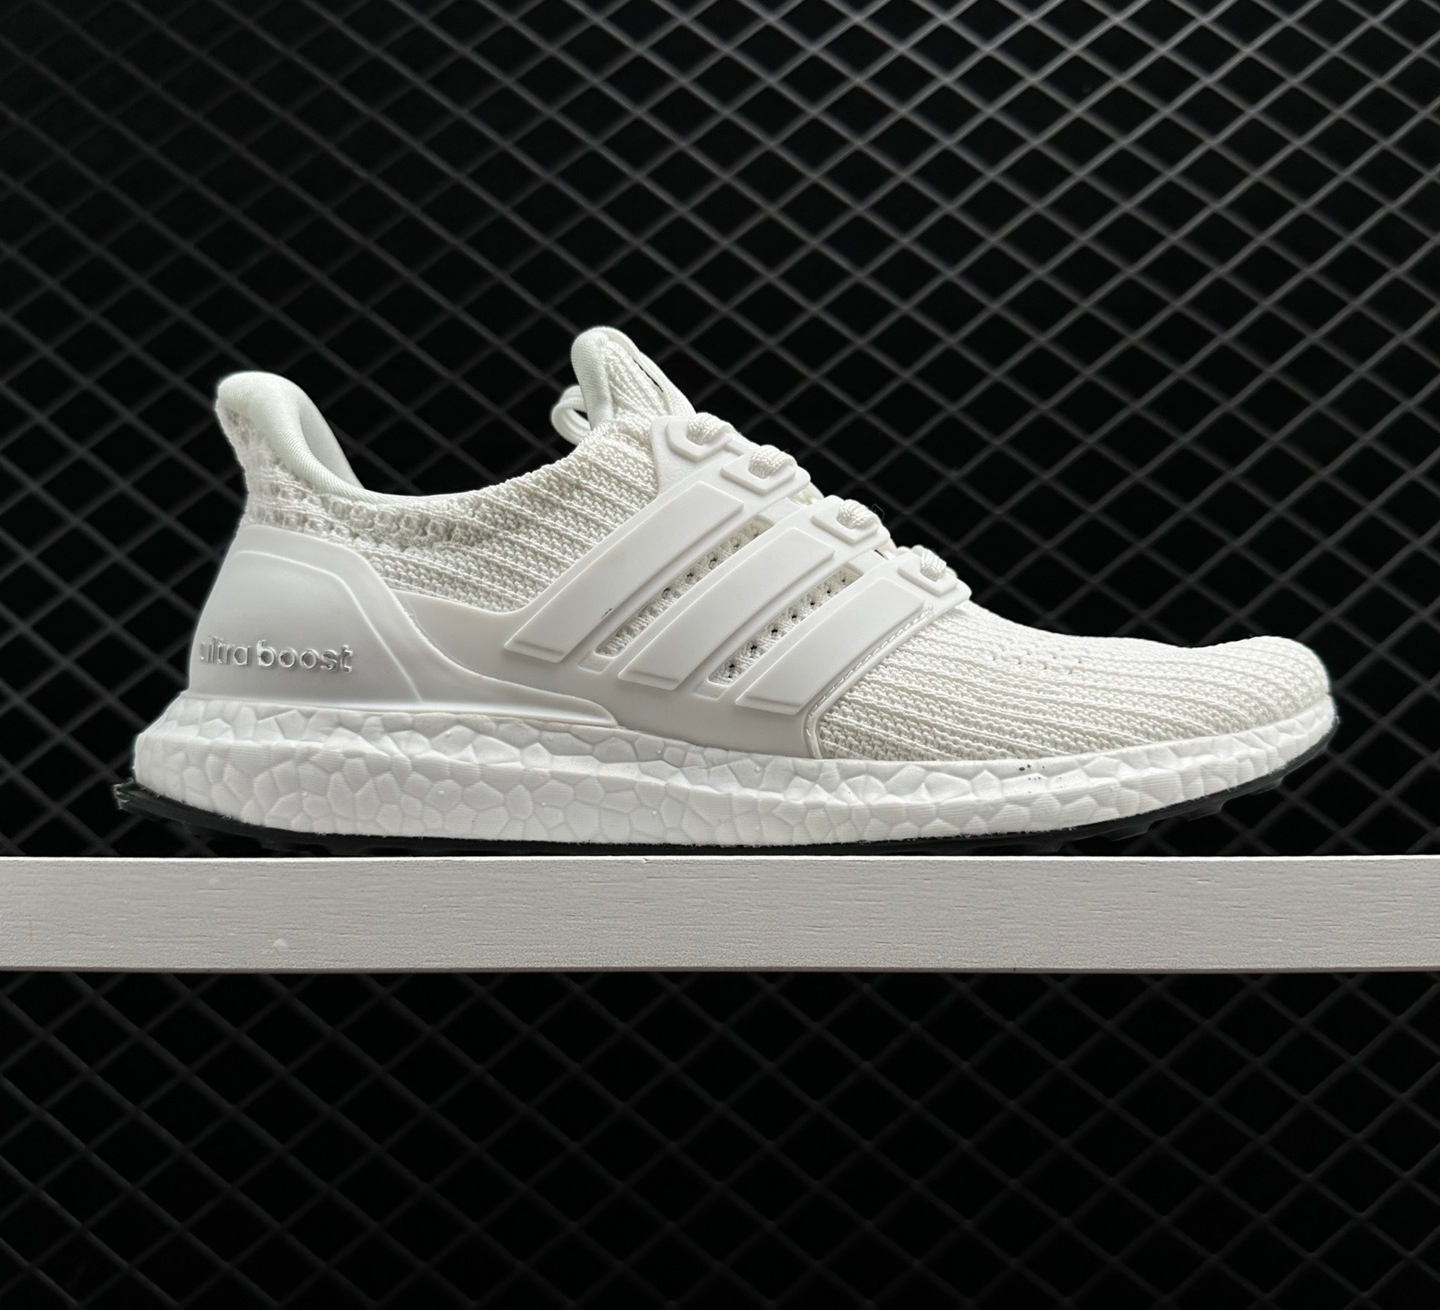 Adidas UltraBoost 4.0 - BB6168 'Triple White' | Premium comfort and style